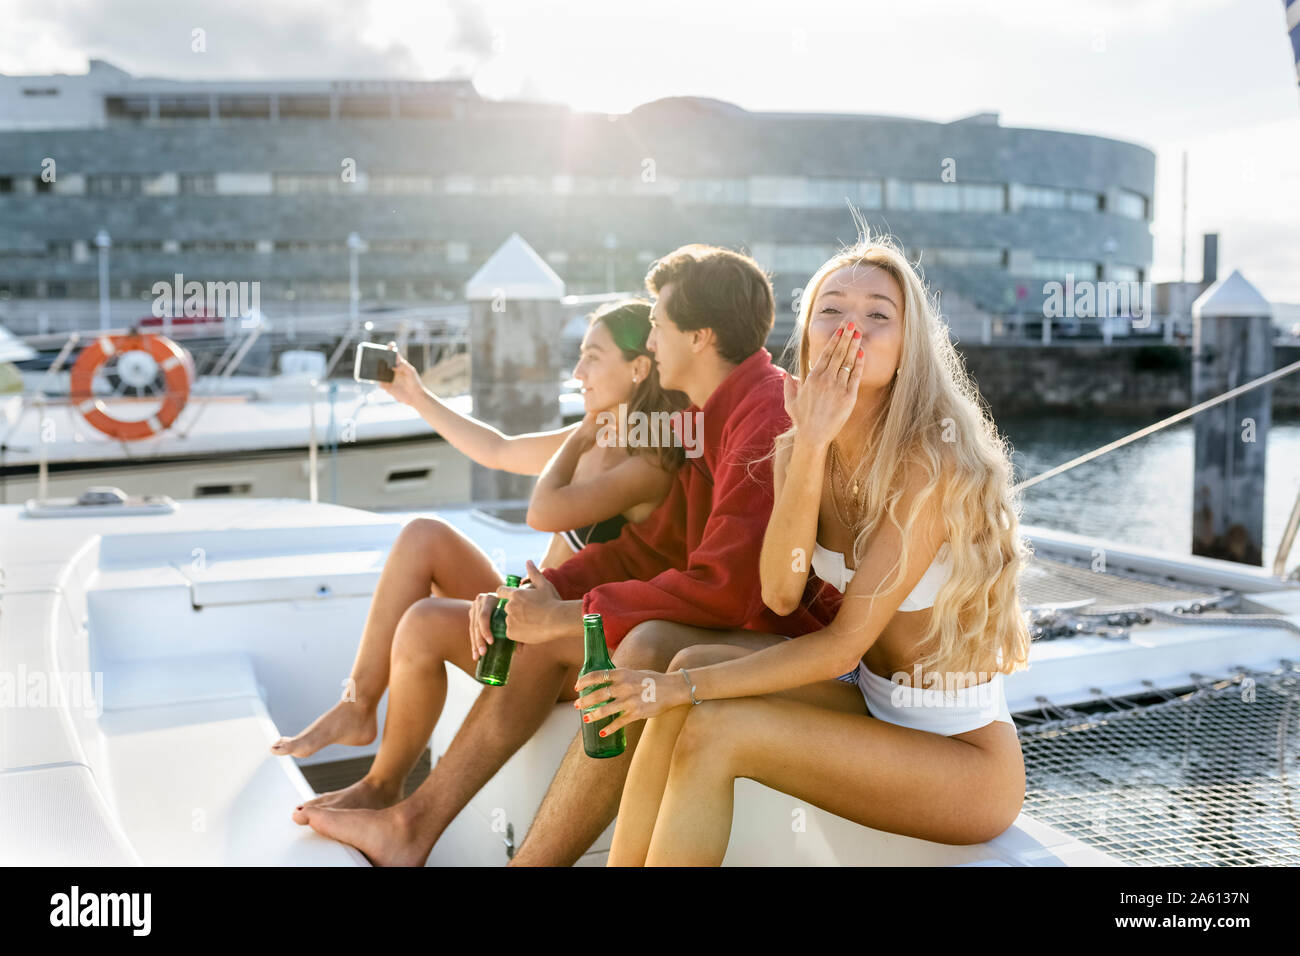 Three young friends enjoying a summer day on a sailboat, taking a selfie Stock Photo